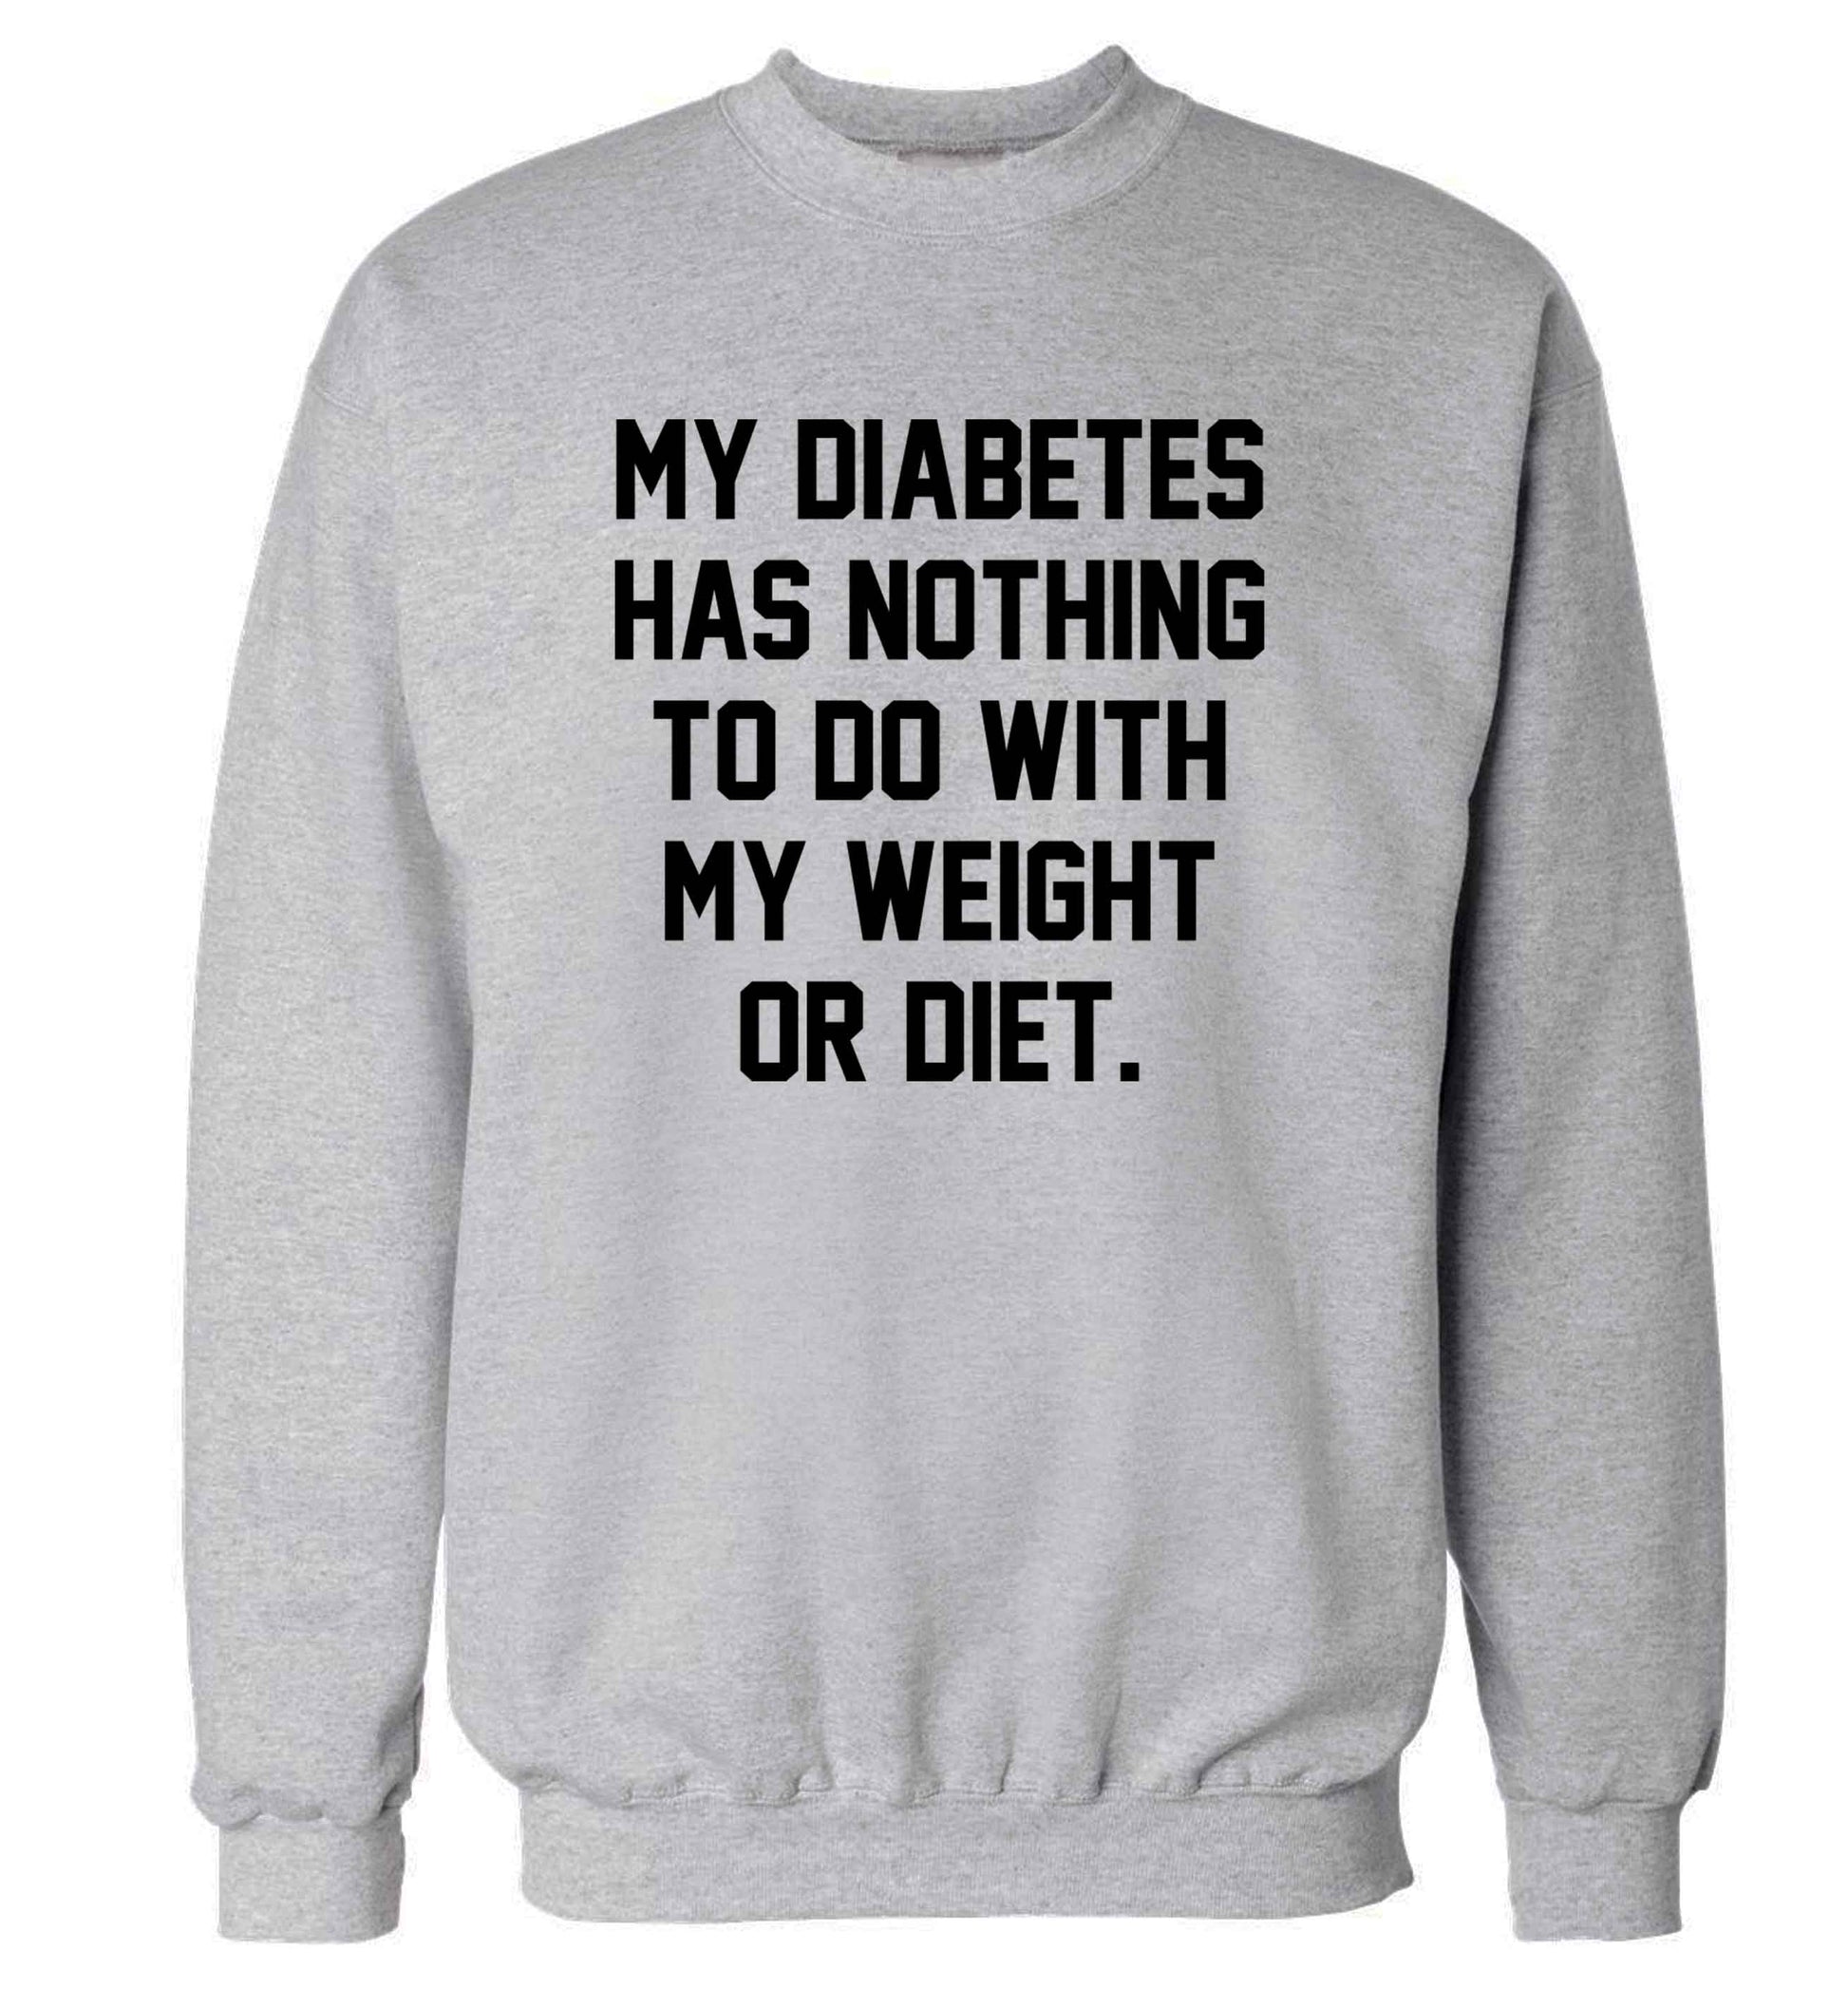 My diabetes has nothing to do with my weight or diet adult's unisex grey sweater 2XL